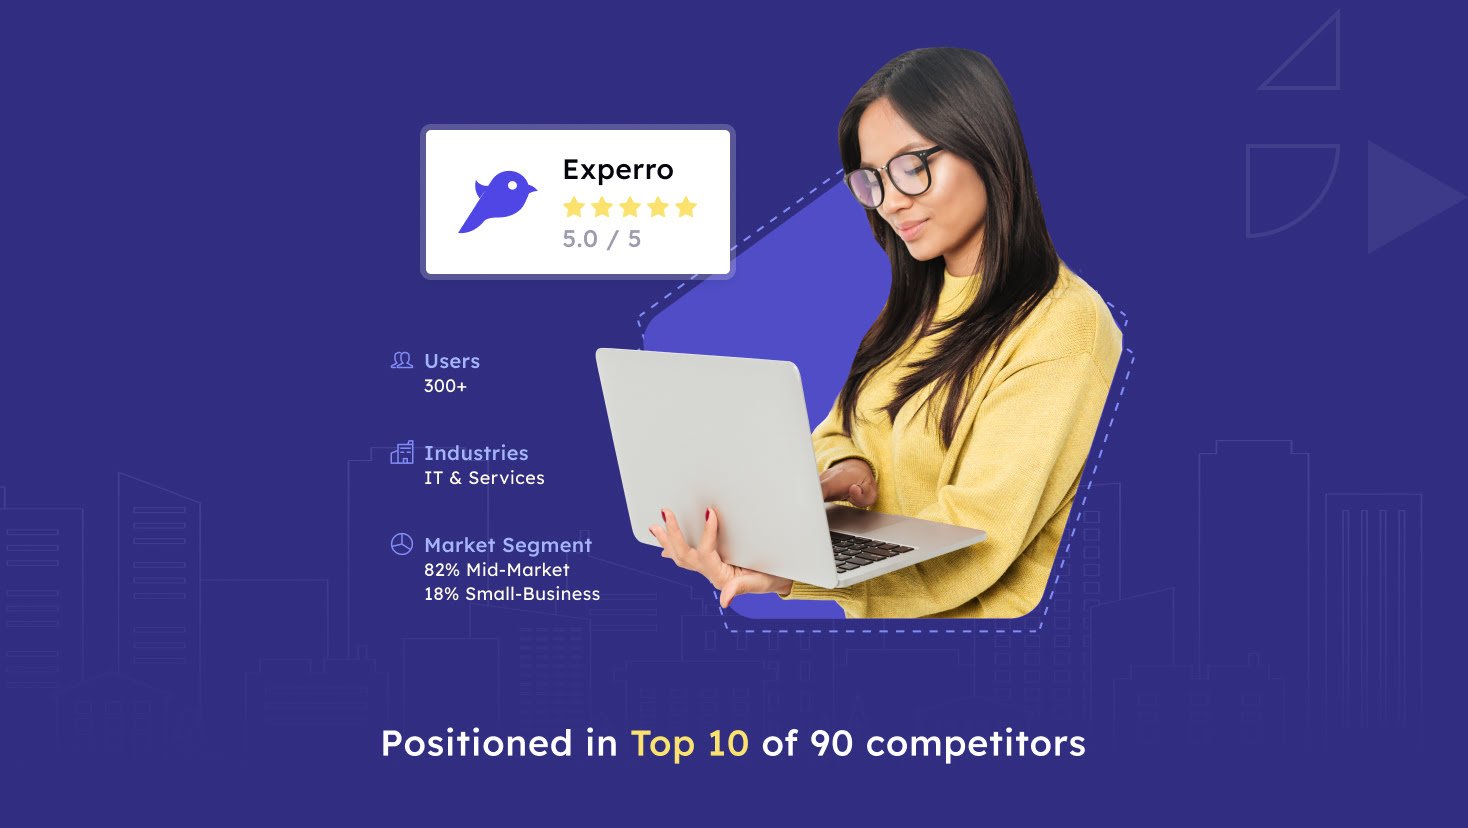 Experro in Top 10 of 90 Competitors